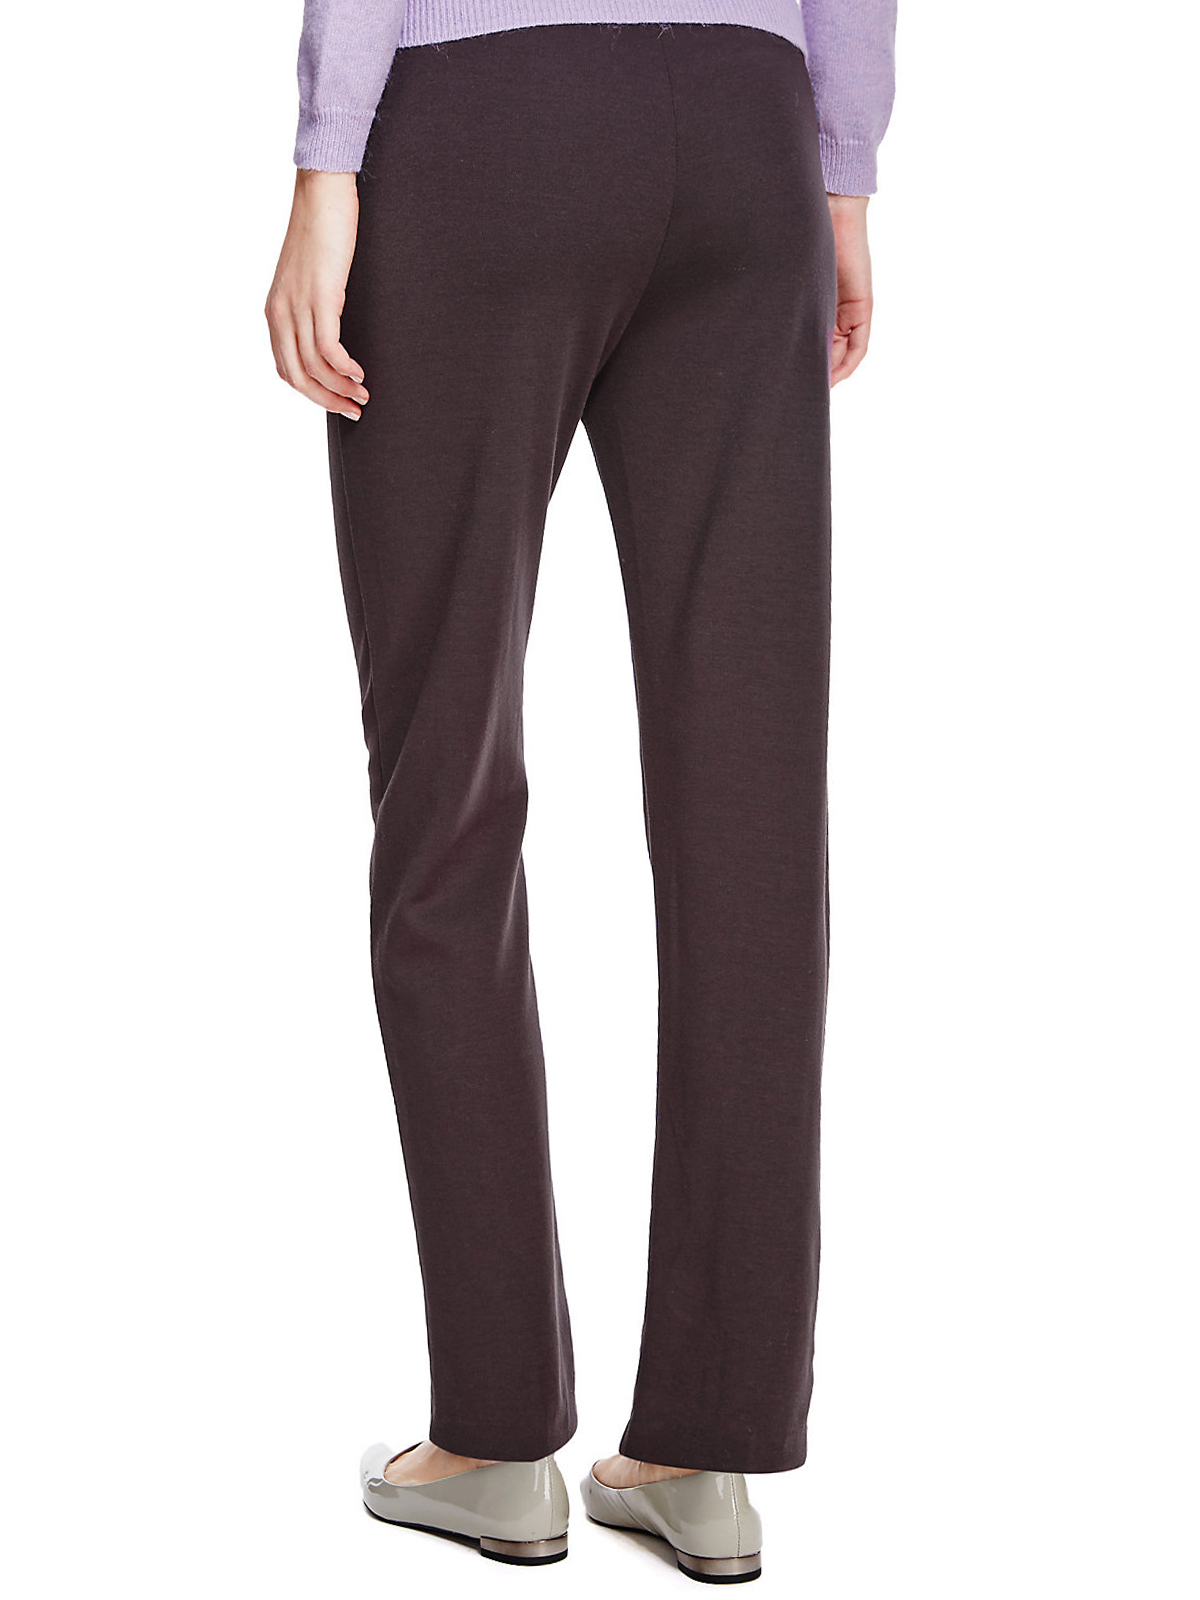 Marks and Spencer - - M&5 GRAPE Straight Leg Side Pocket Ponte Trousers ...